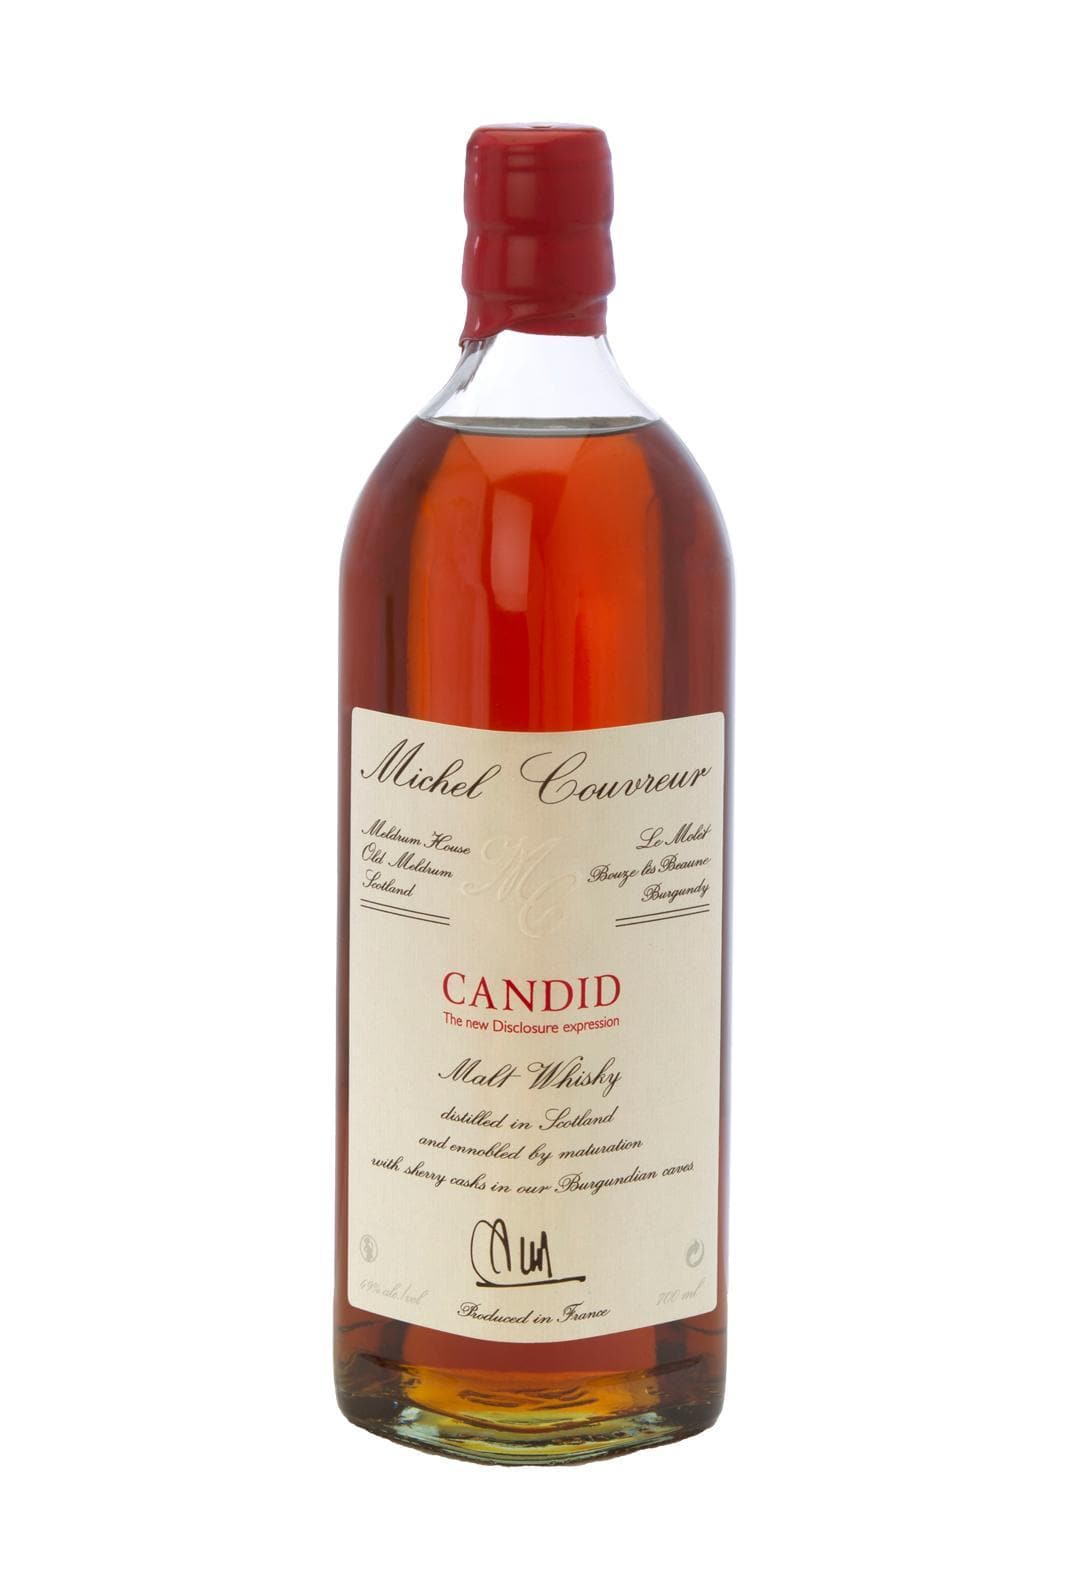 Michel Couvreur Whisky Candid 43% 700ML | Whiskey | Shop online at Spirits of France